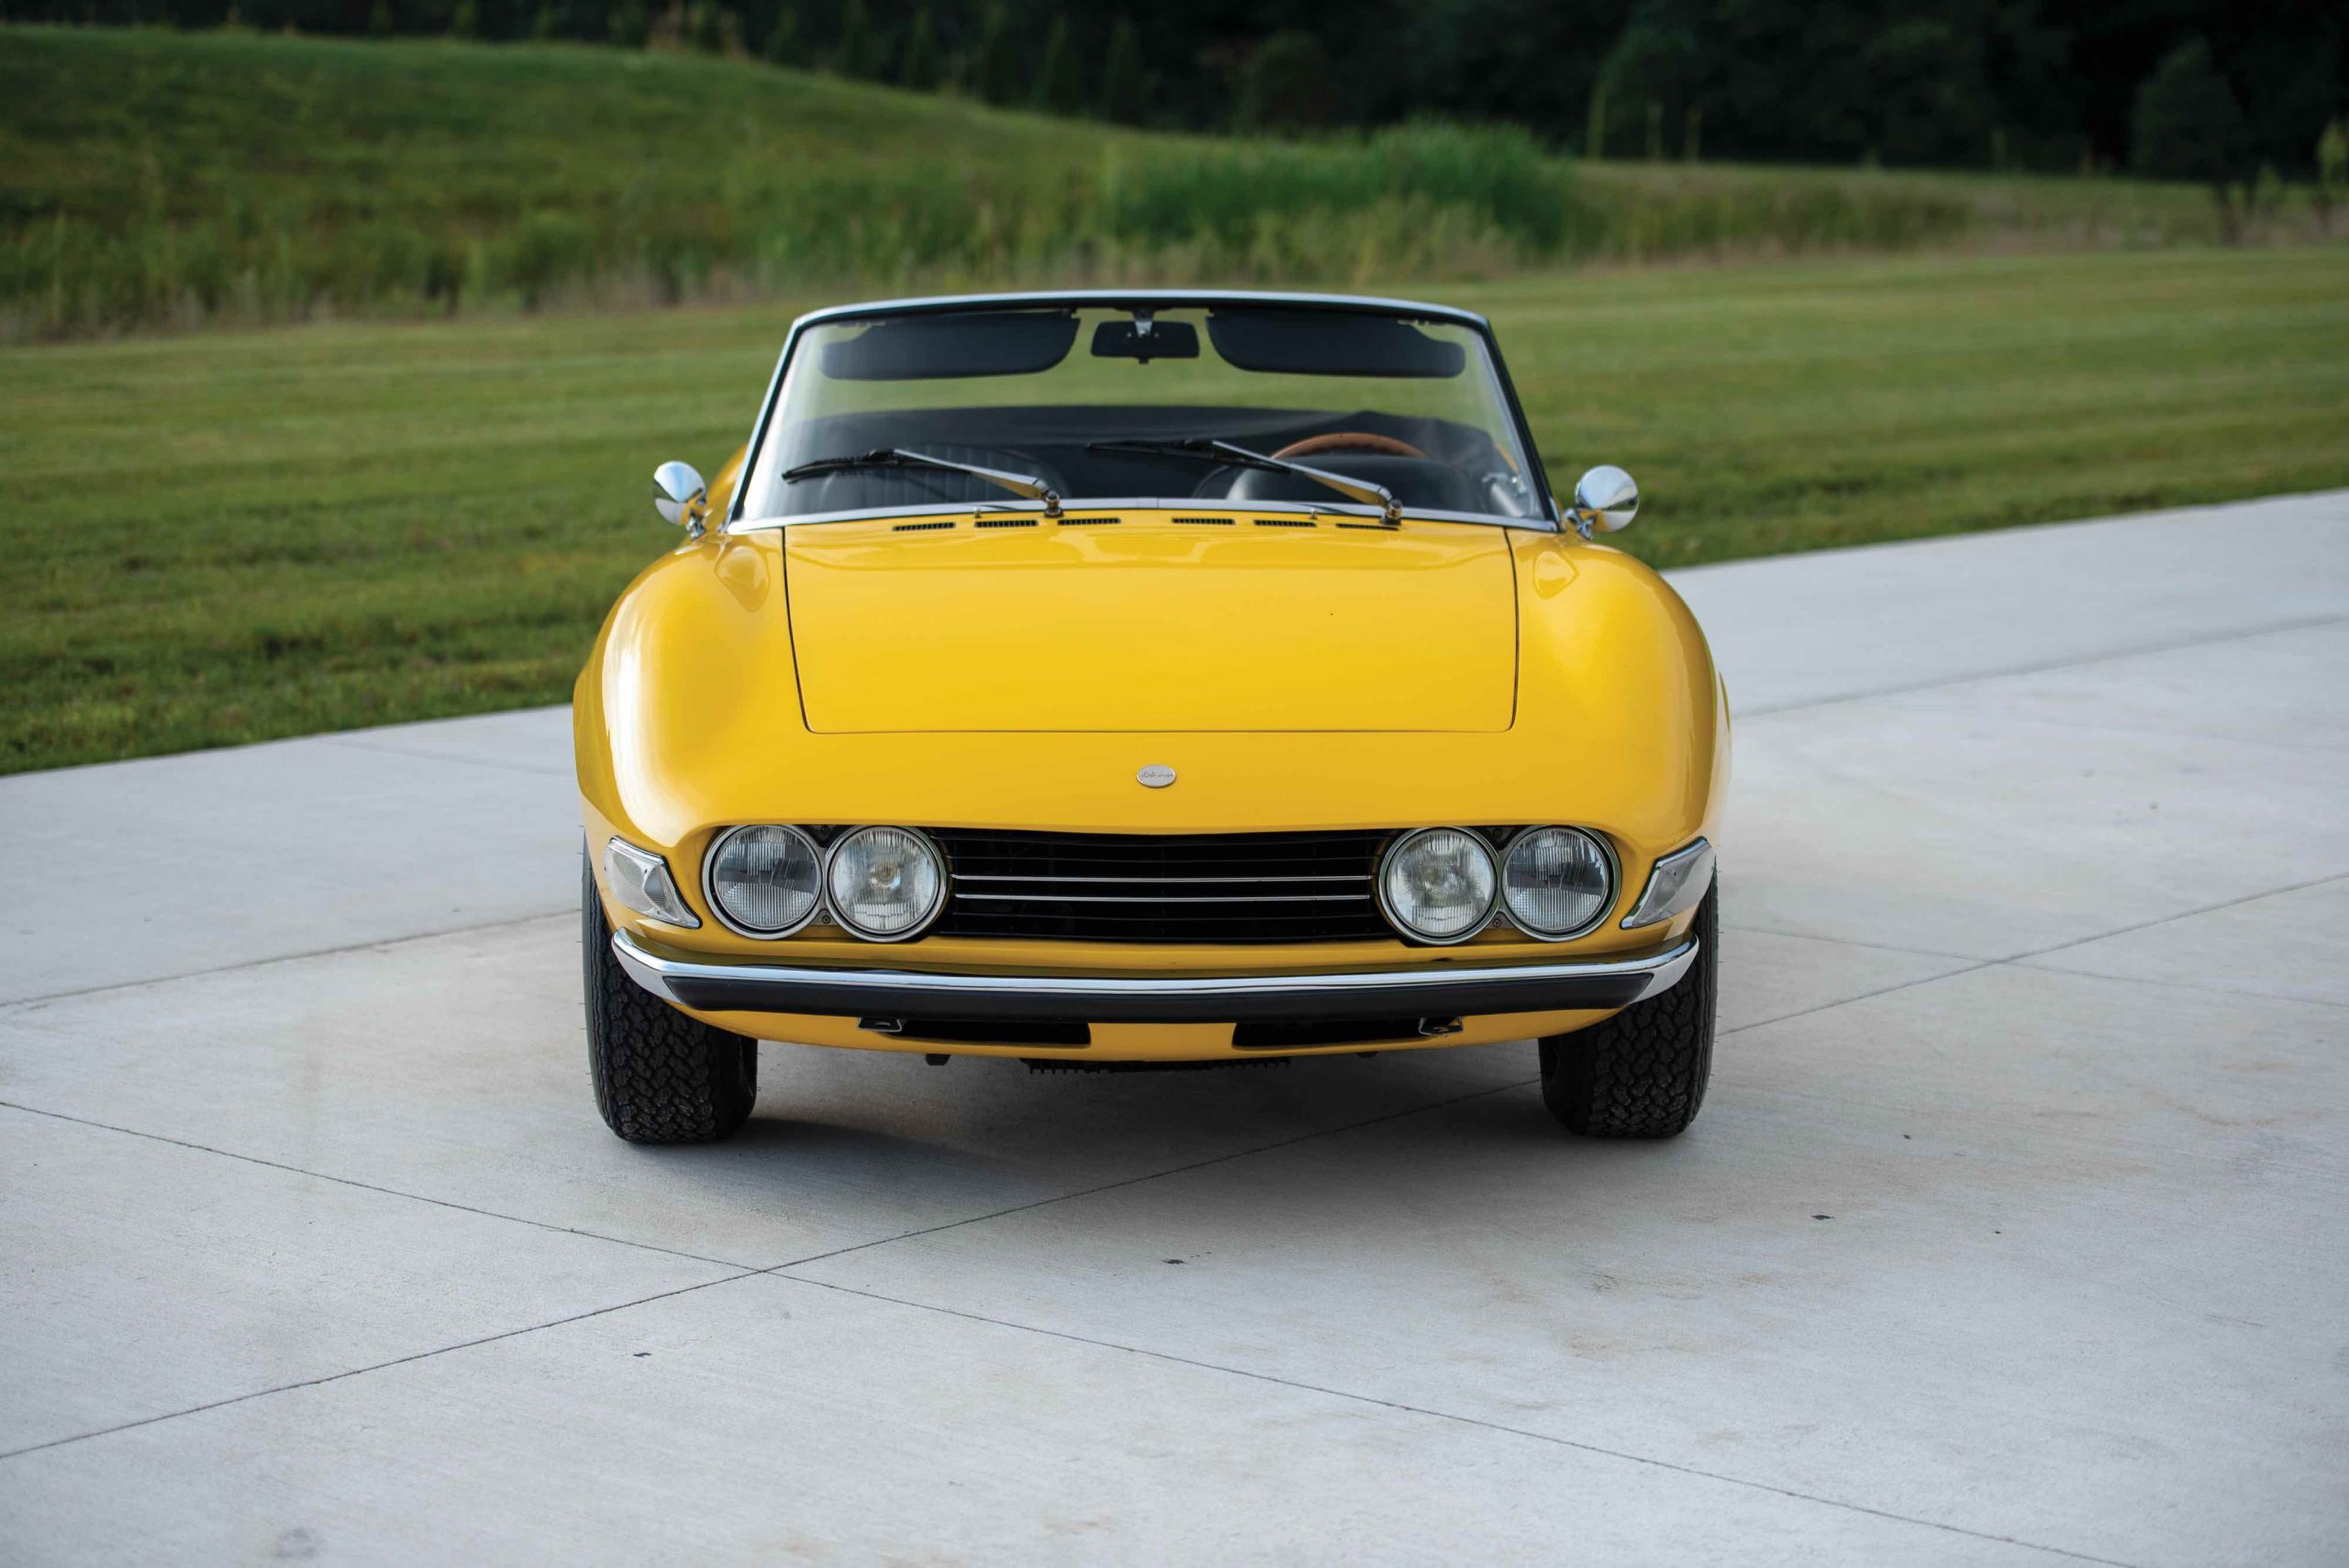 With its Ferrari heart and designer lines, the Fiat Dino won't be a steal forever